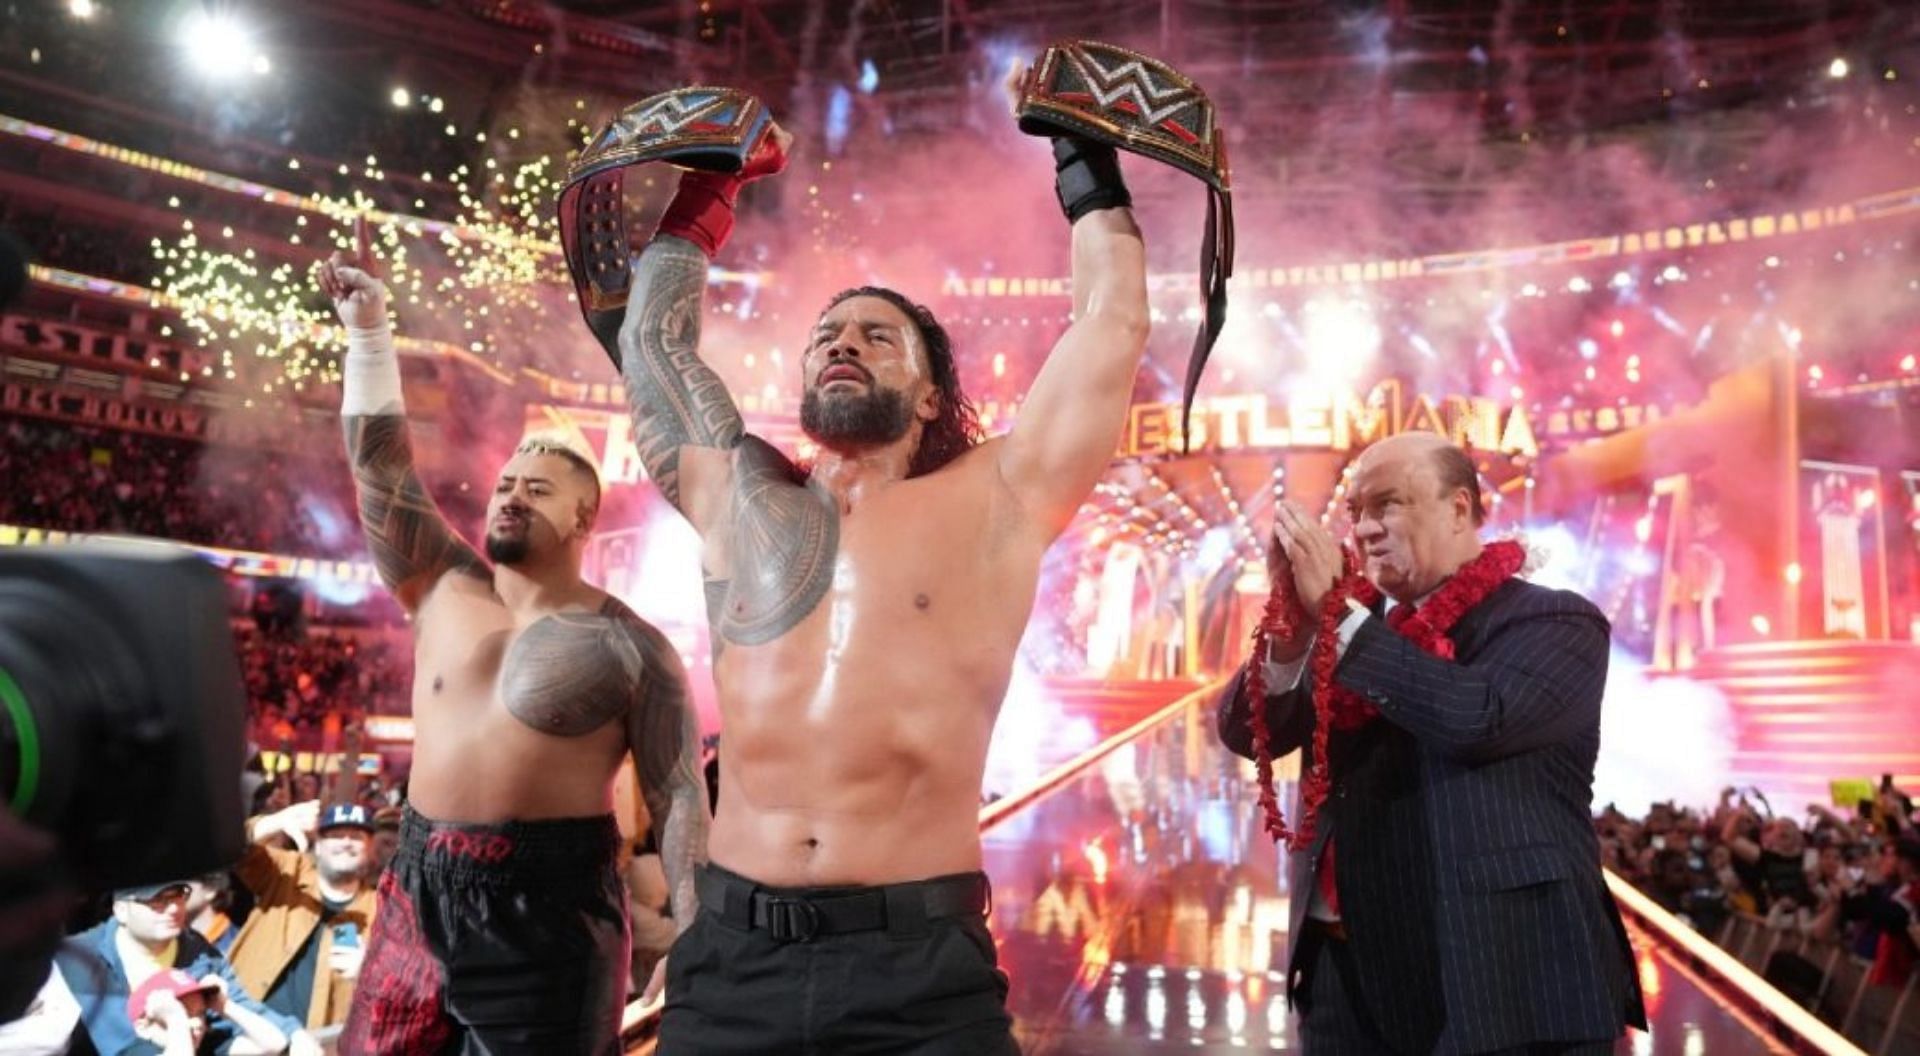 Roman Reigns retained his title at WrestleMania 39